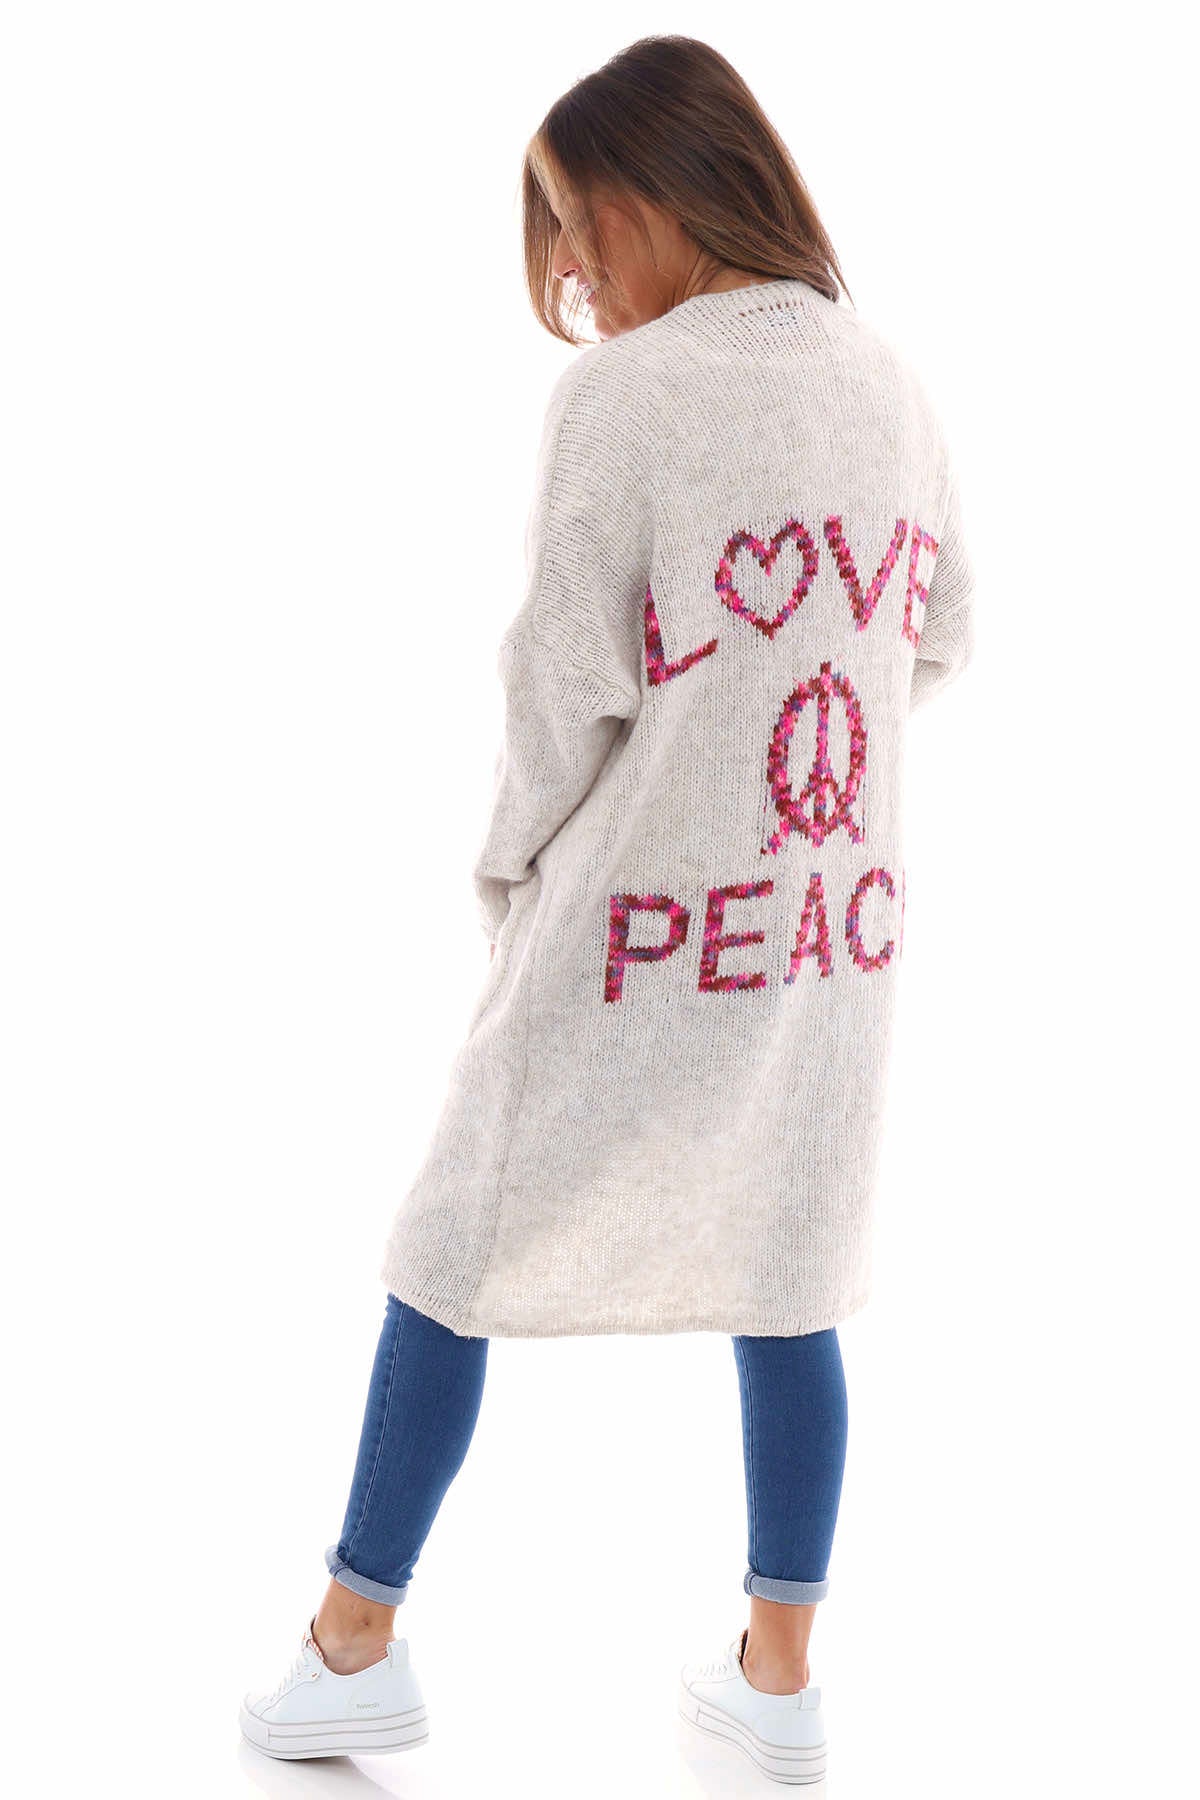 Kit and Kaboodal Love Peace Knitted Cardigan | Kit and Kaboodal